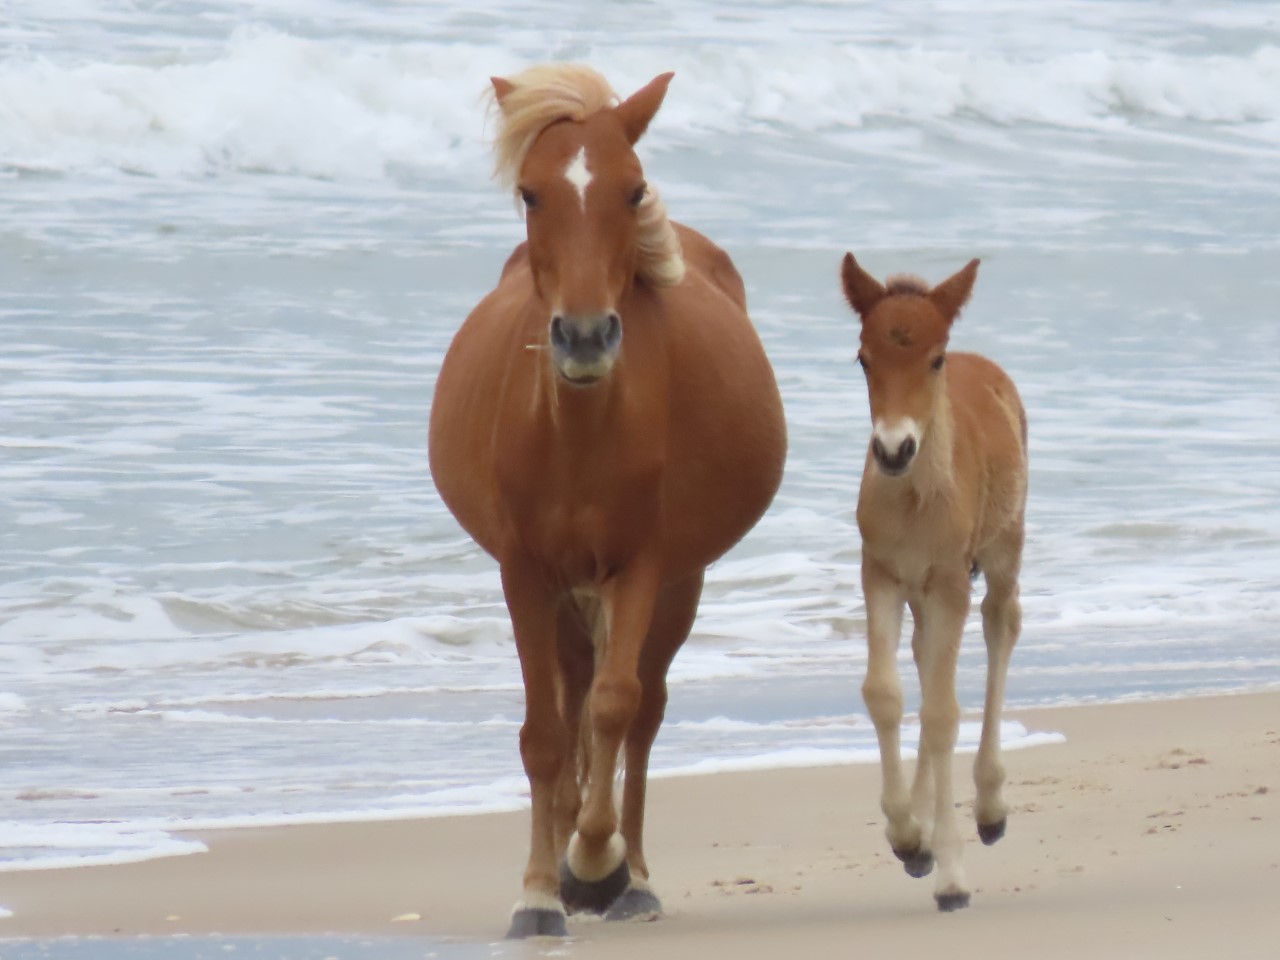 A mare and her colt on the beach - the mare is trotting while her colt canters next to her